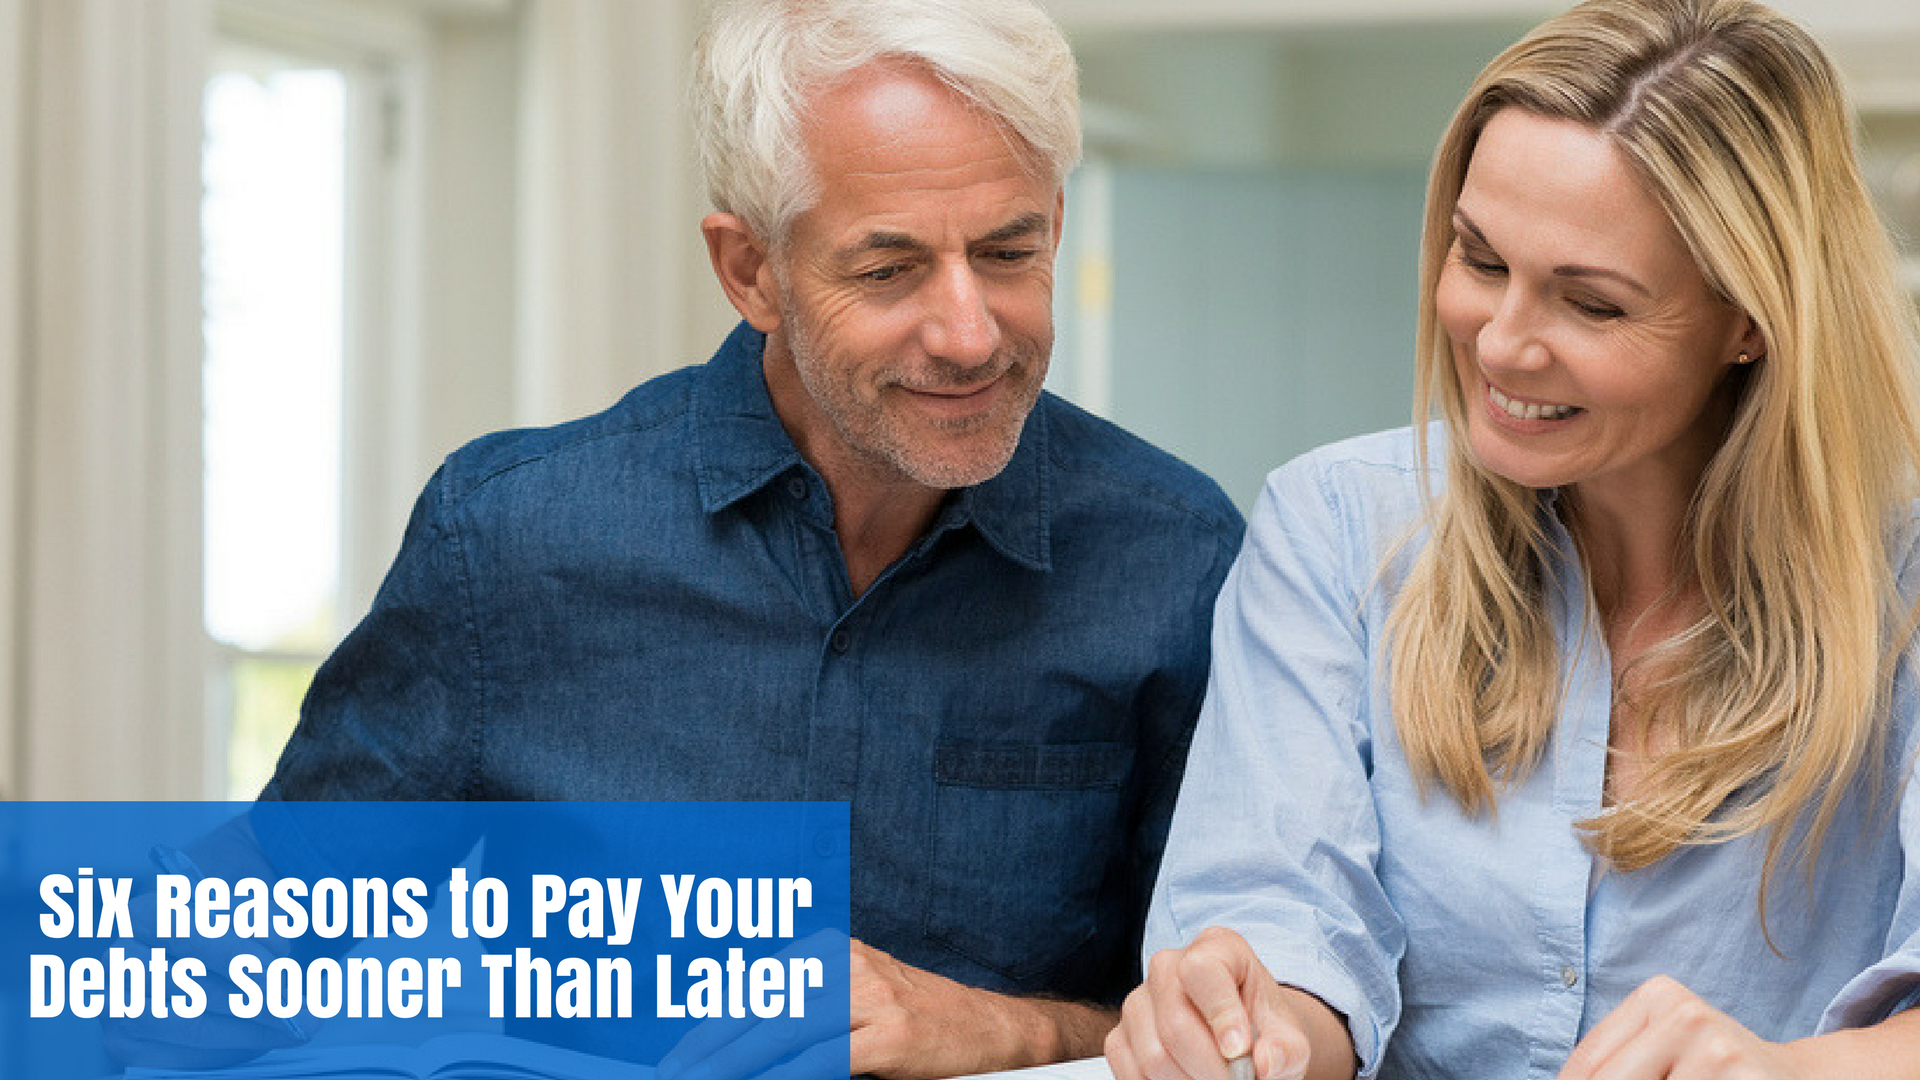 Six Reasons to Pay Your Debts Sooner Rather Than Later